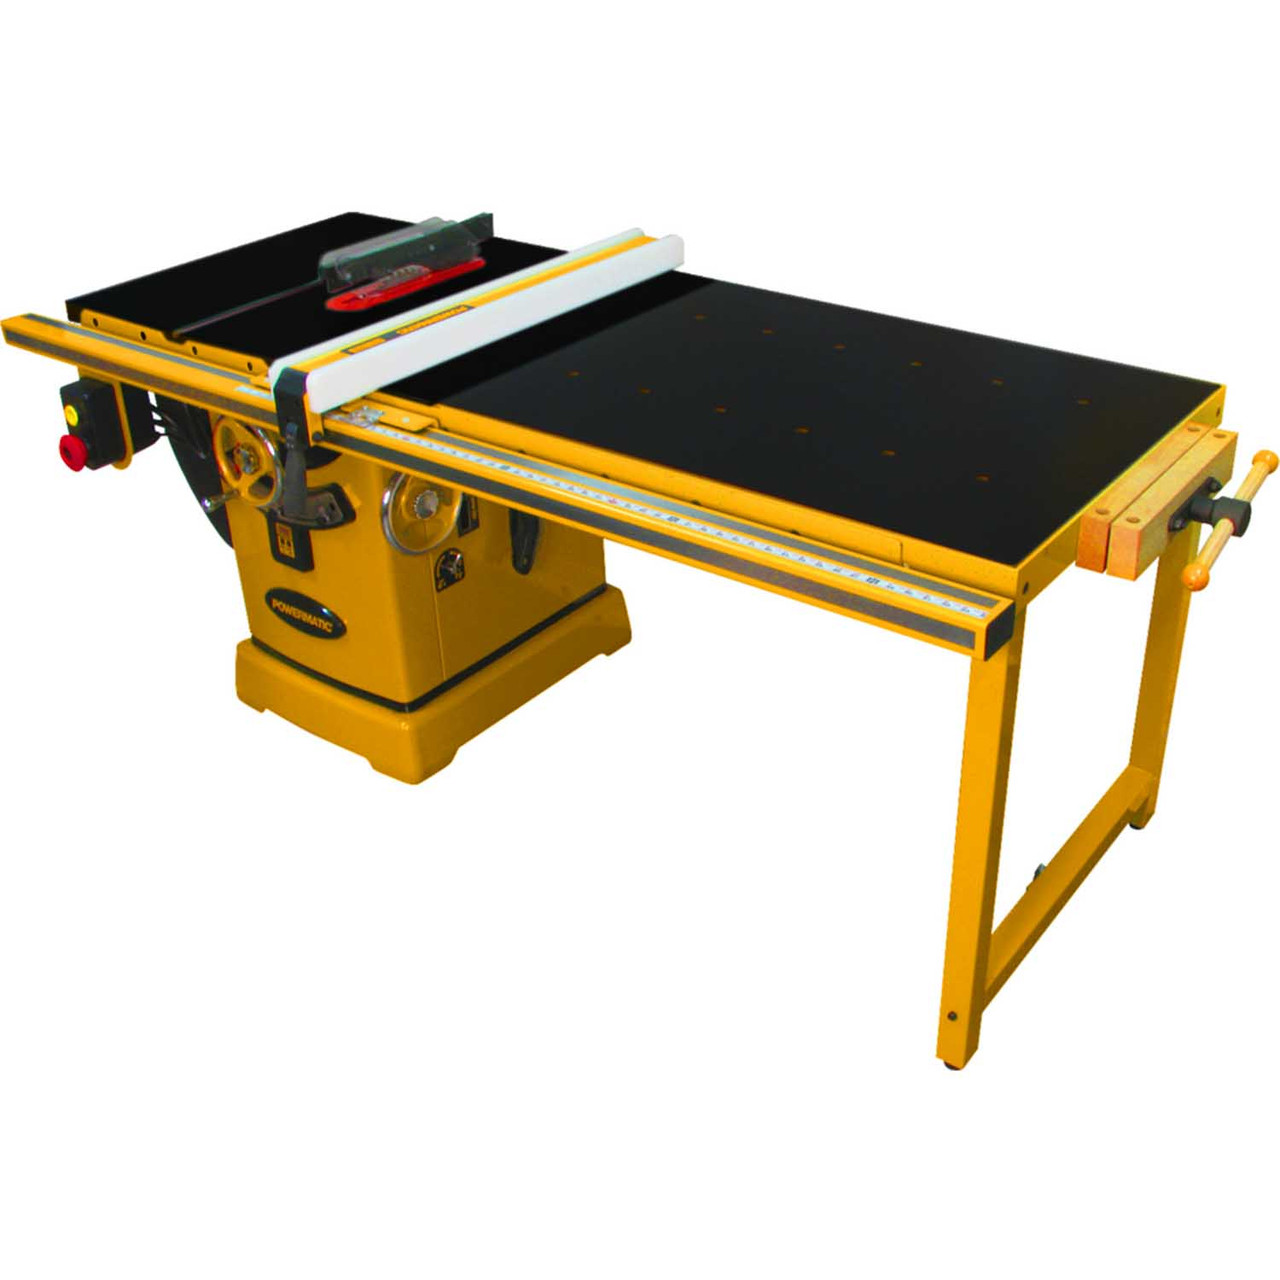 Powermatic, PM1-PM25350KT, PM2000T 10" Table Saw with ArmorGlide, 5HP 3PH 230V 50" RIP